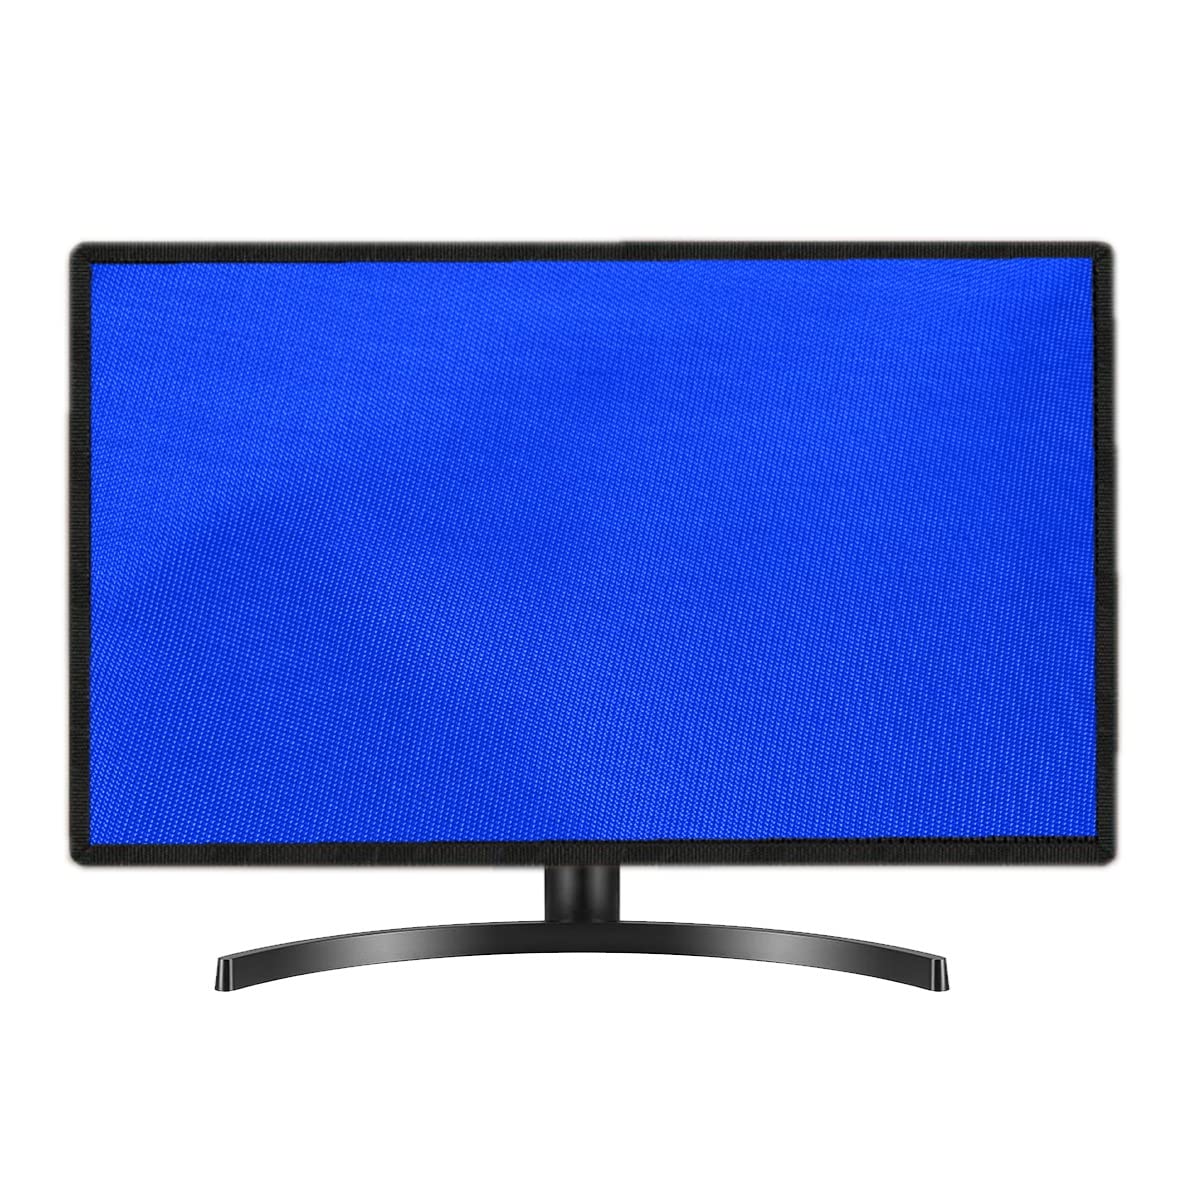 PalaP Super Premium Dust Proof Monitor Cover for LG 19 inches Monitor (Bright Blue)